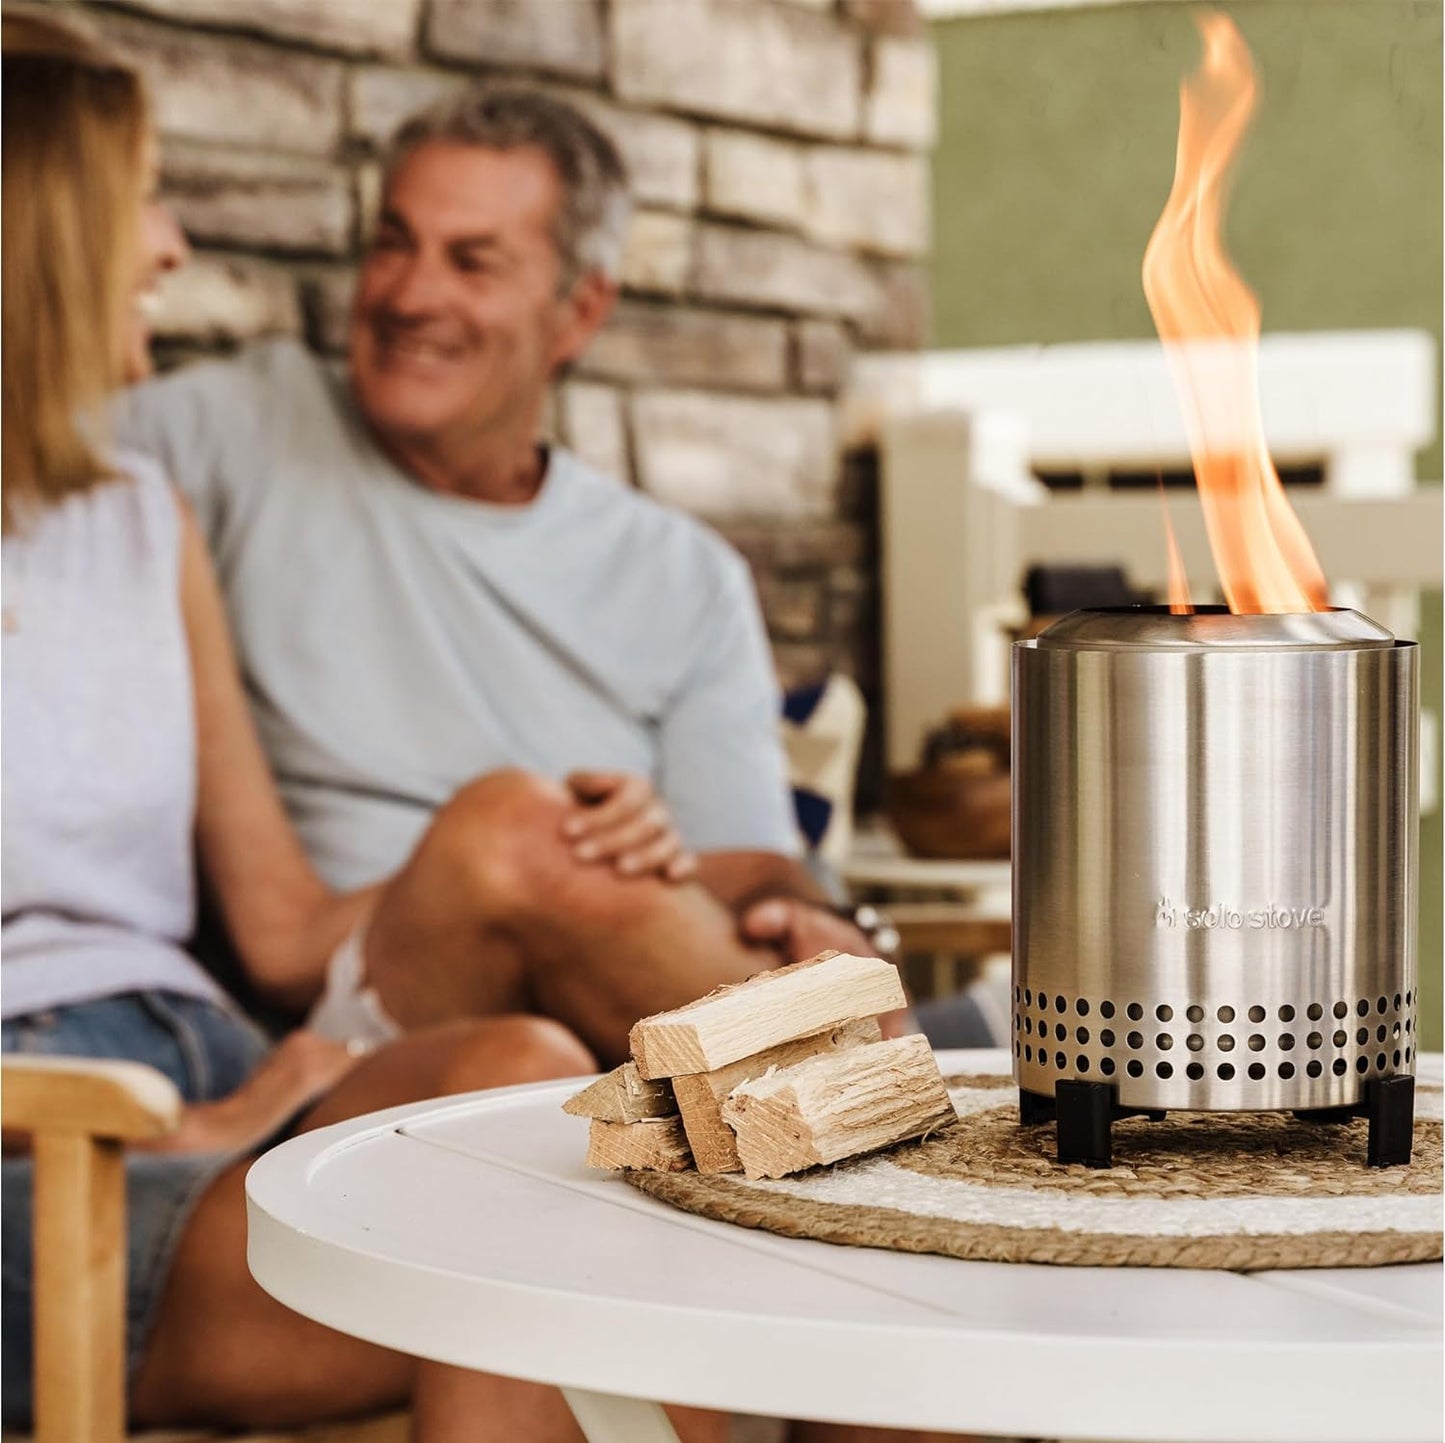 Solo Stove Mesa XL Tabletop Fire Pit with Stand | Low Smoke Outdoor Mini Fire for Urban & Suburbs | Fueled by Pellets or Wood, Stainless Steel, with Travel Bag, H: 8.6" x D: 7", 2.3 lbs, Green